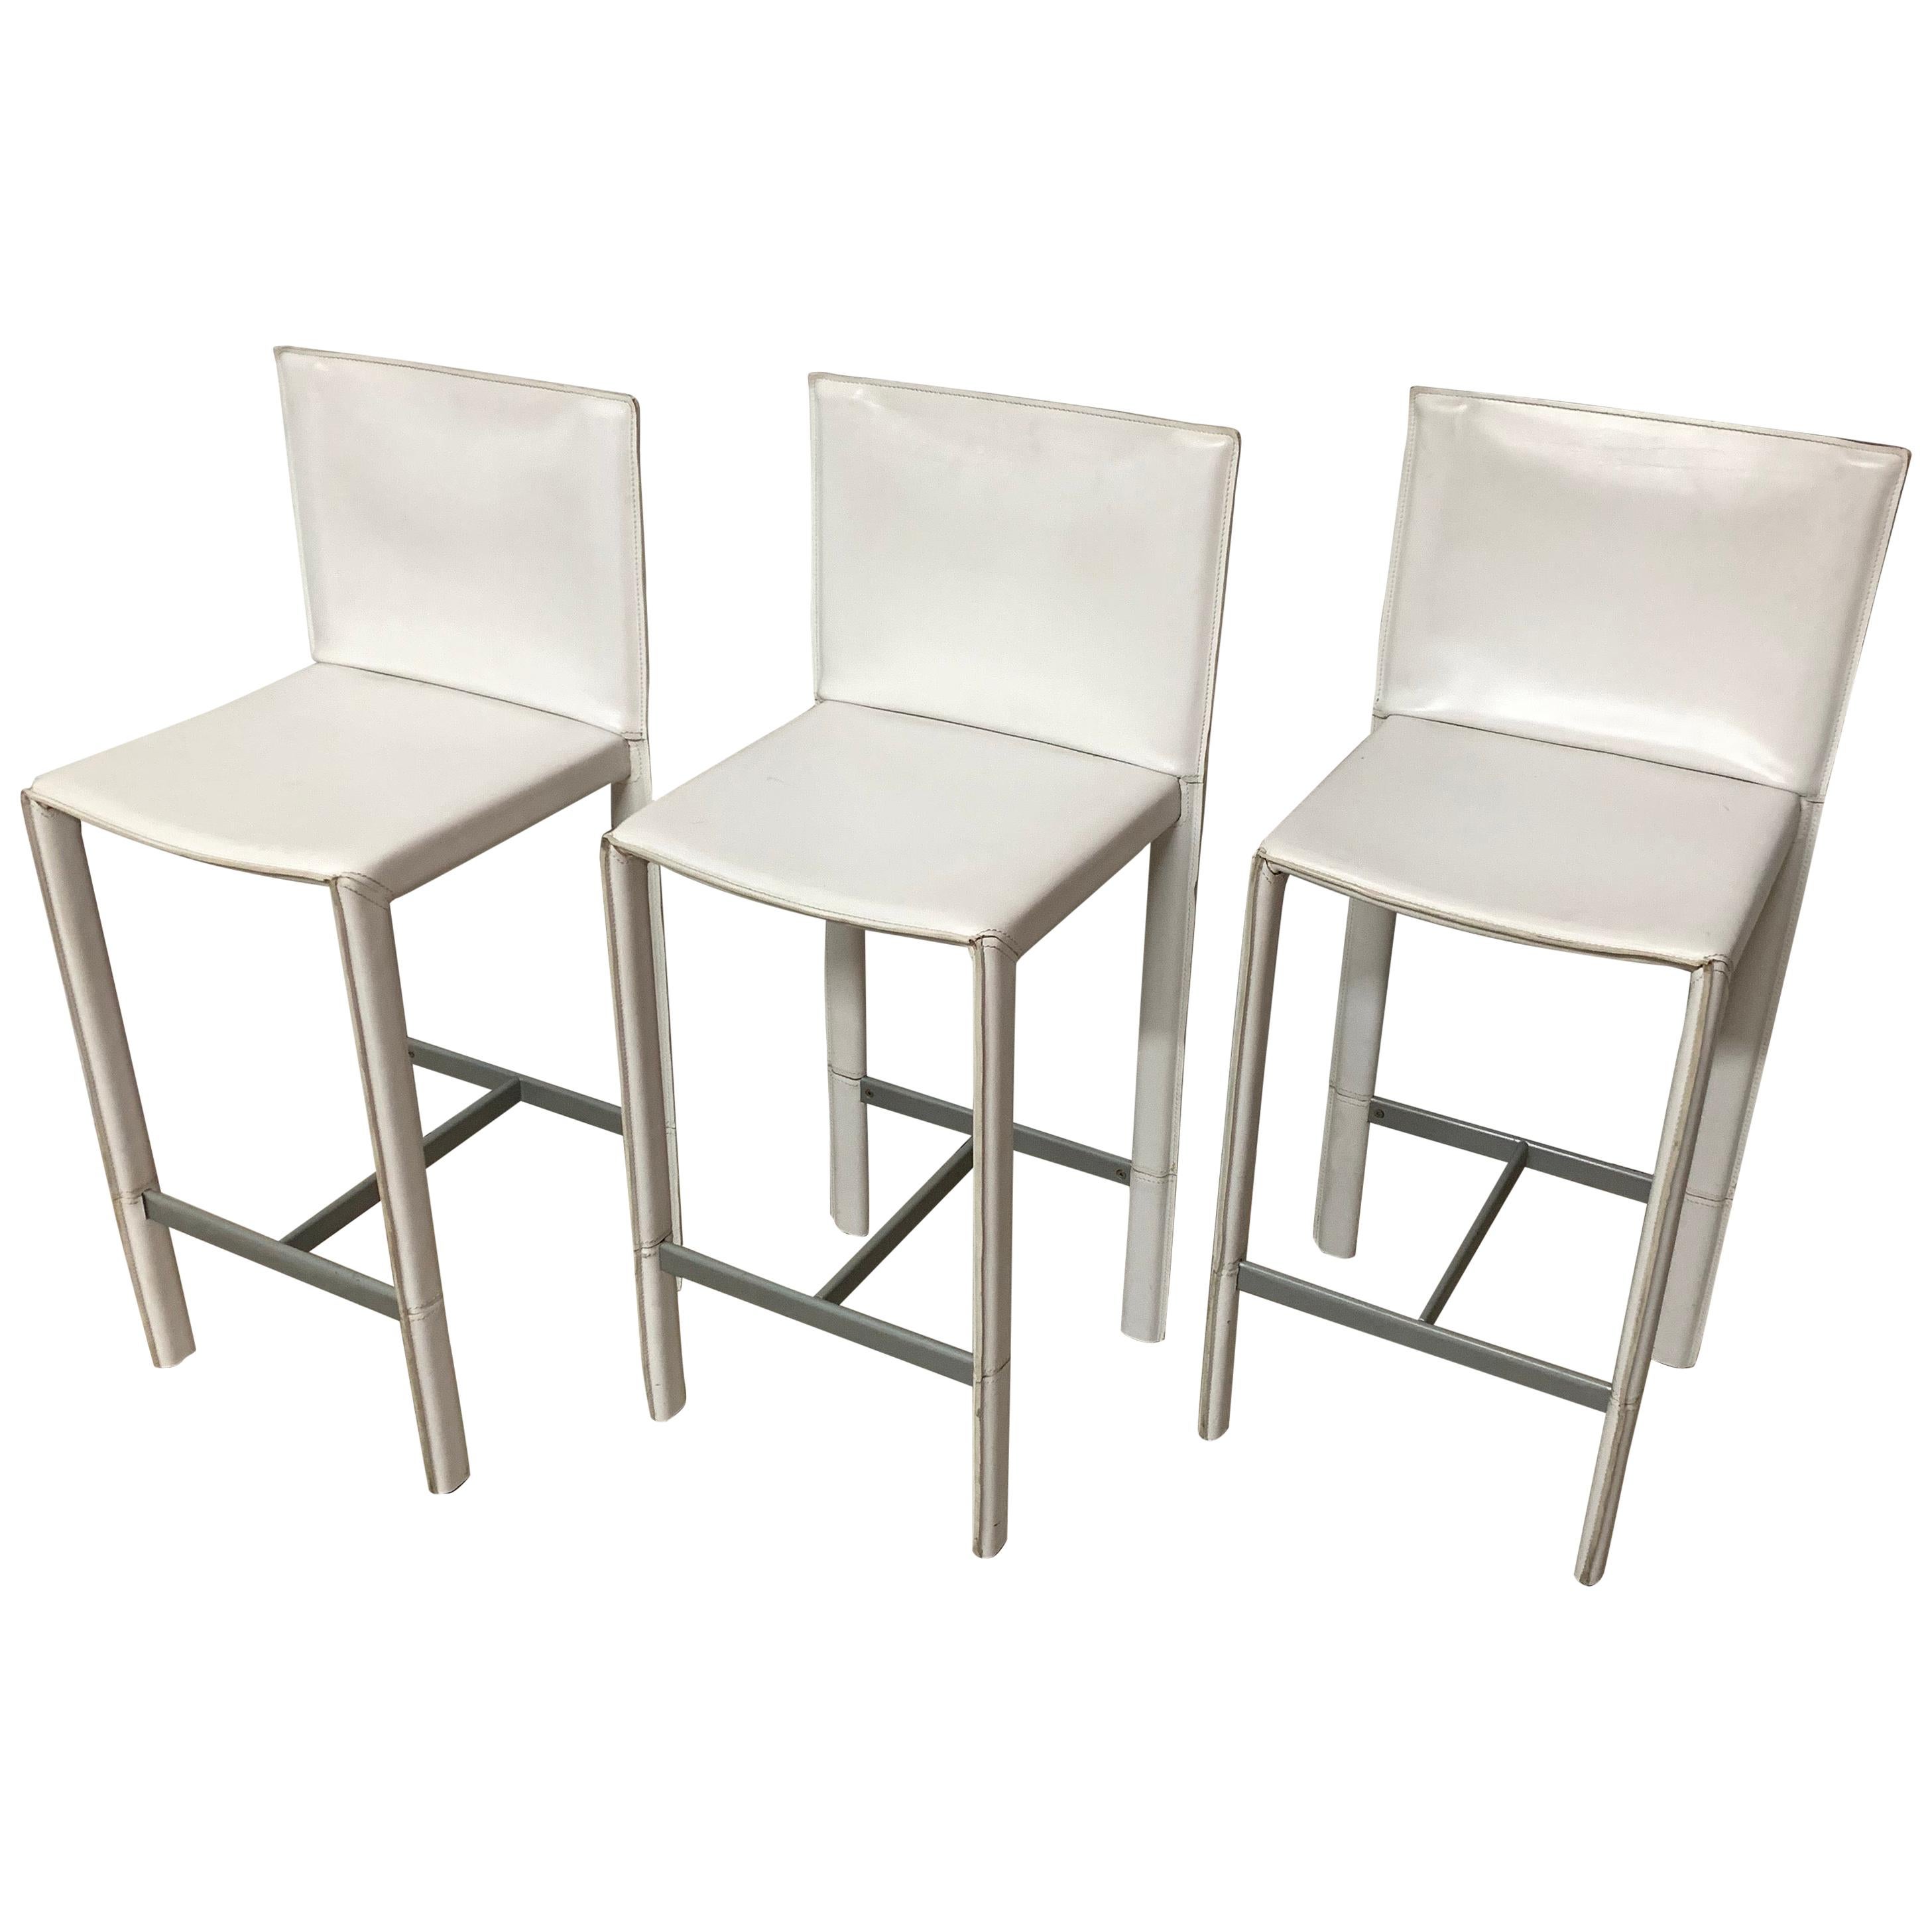 Set of Three Grazzi and Bianchi Stitched Leather Barstools for Enrico Pellizzoni